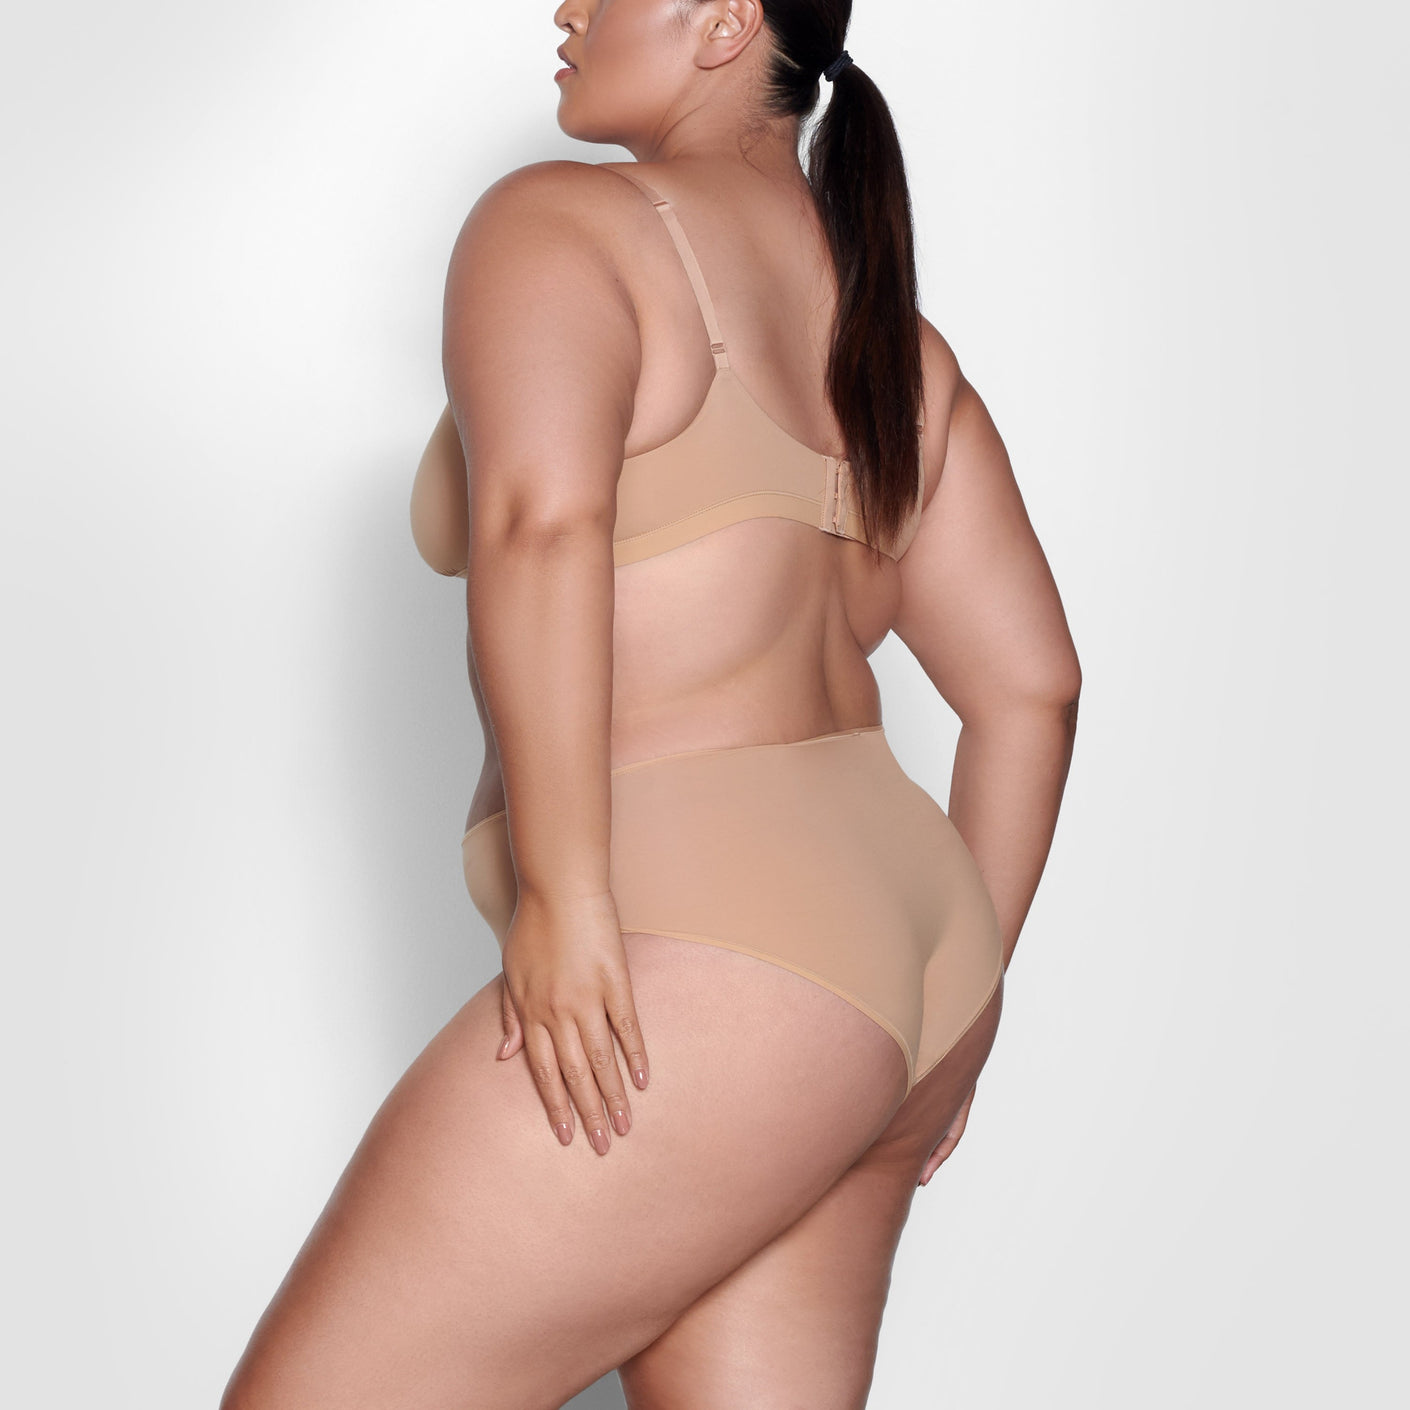 I'm plus-size – I tried Skims for the first time, the underwear